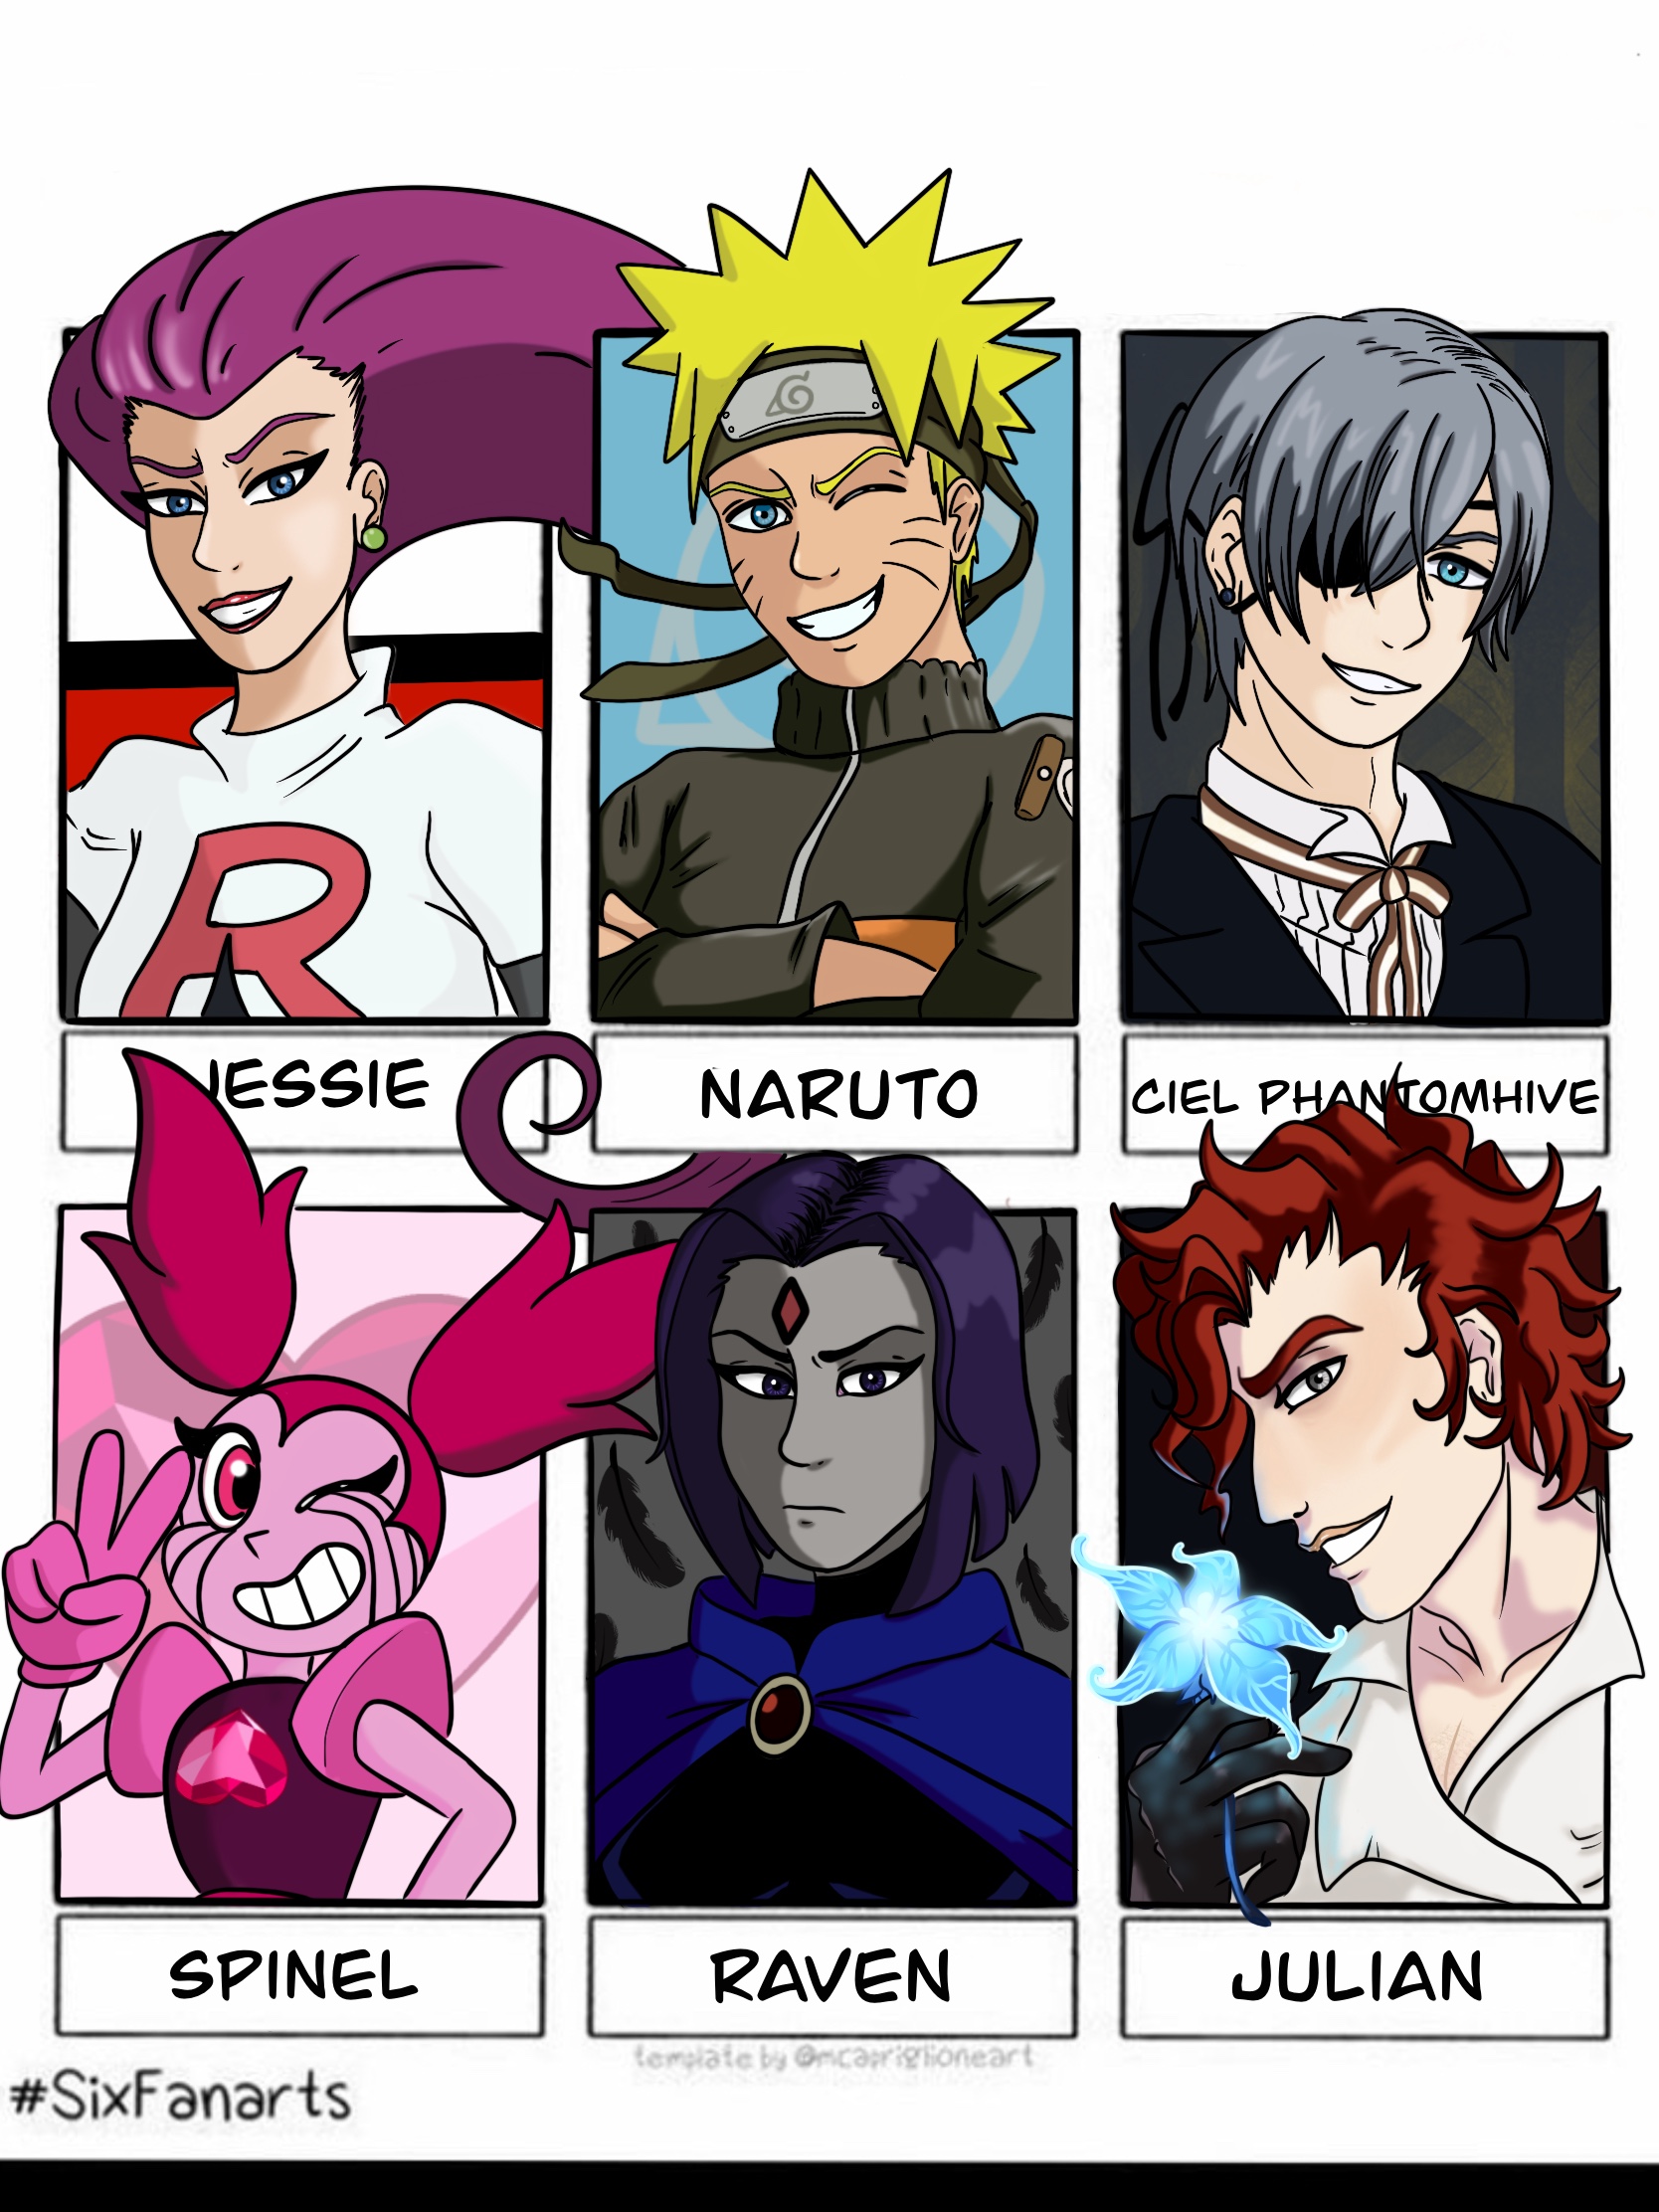 Top 20 Favorite Naruto Characters by FlameKnight219 on DeviantArt